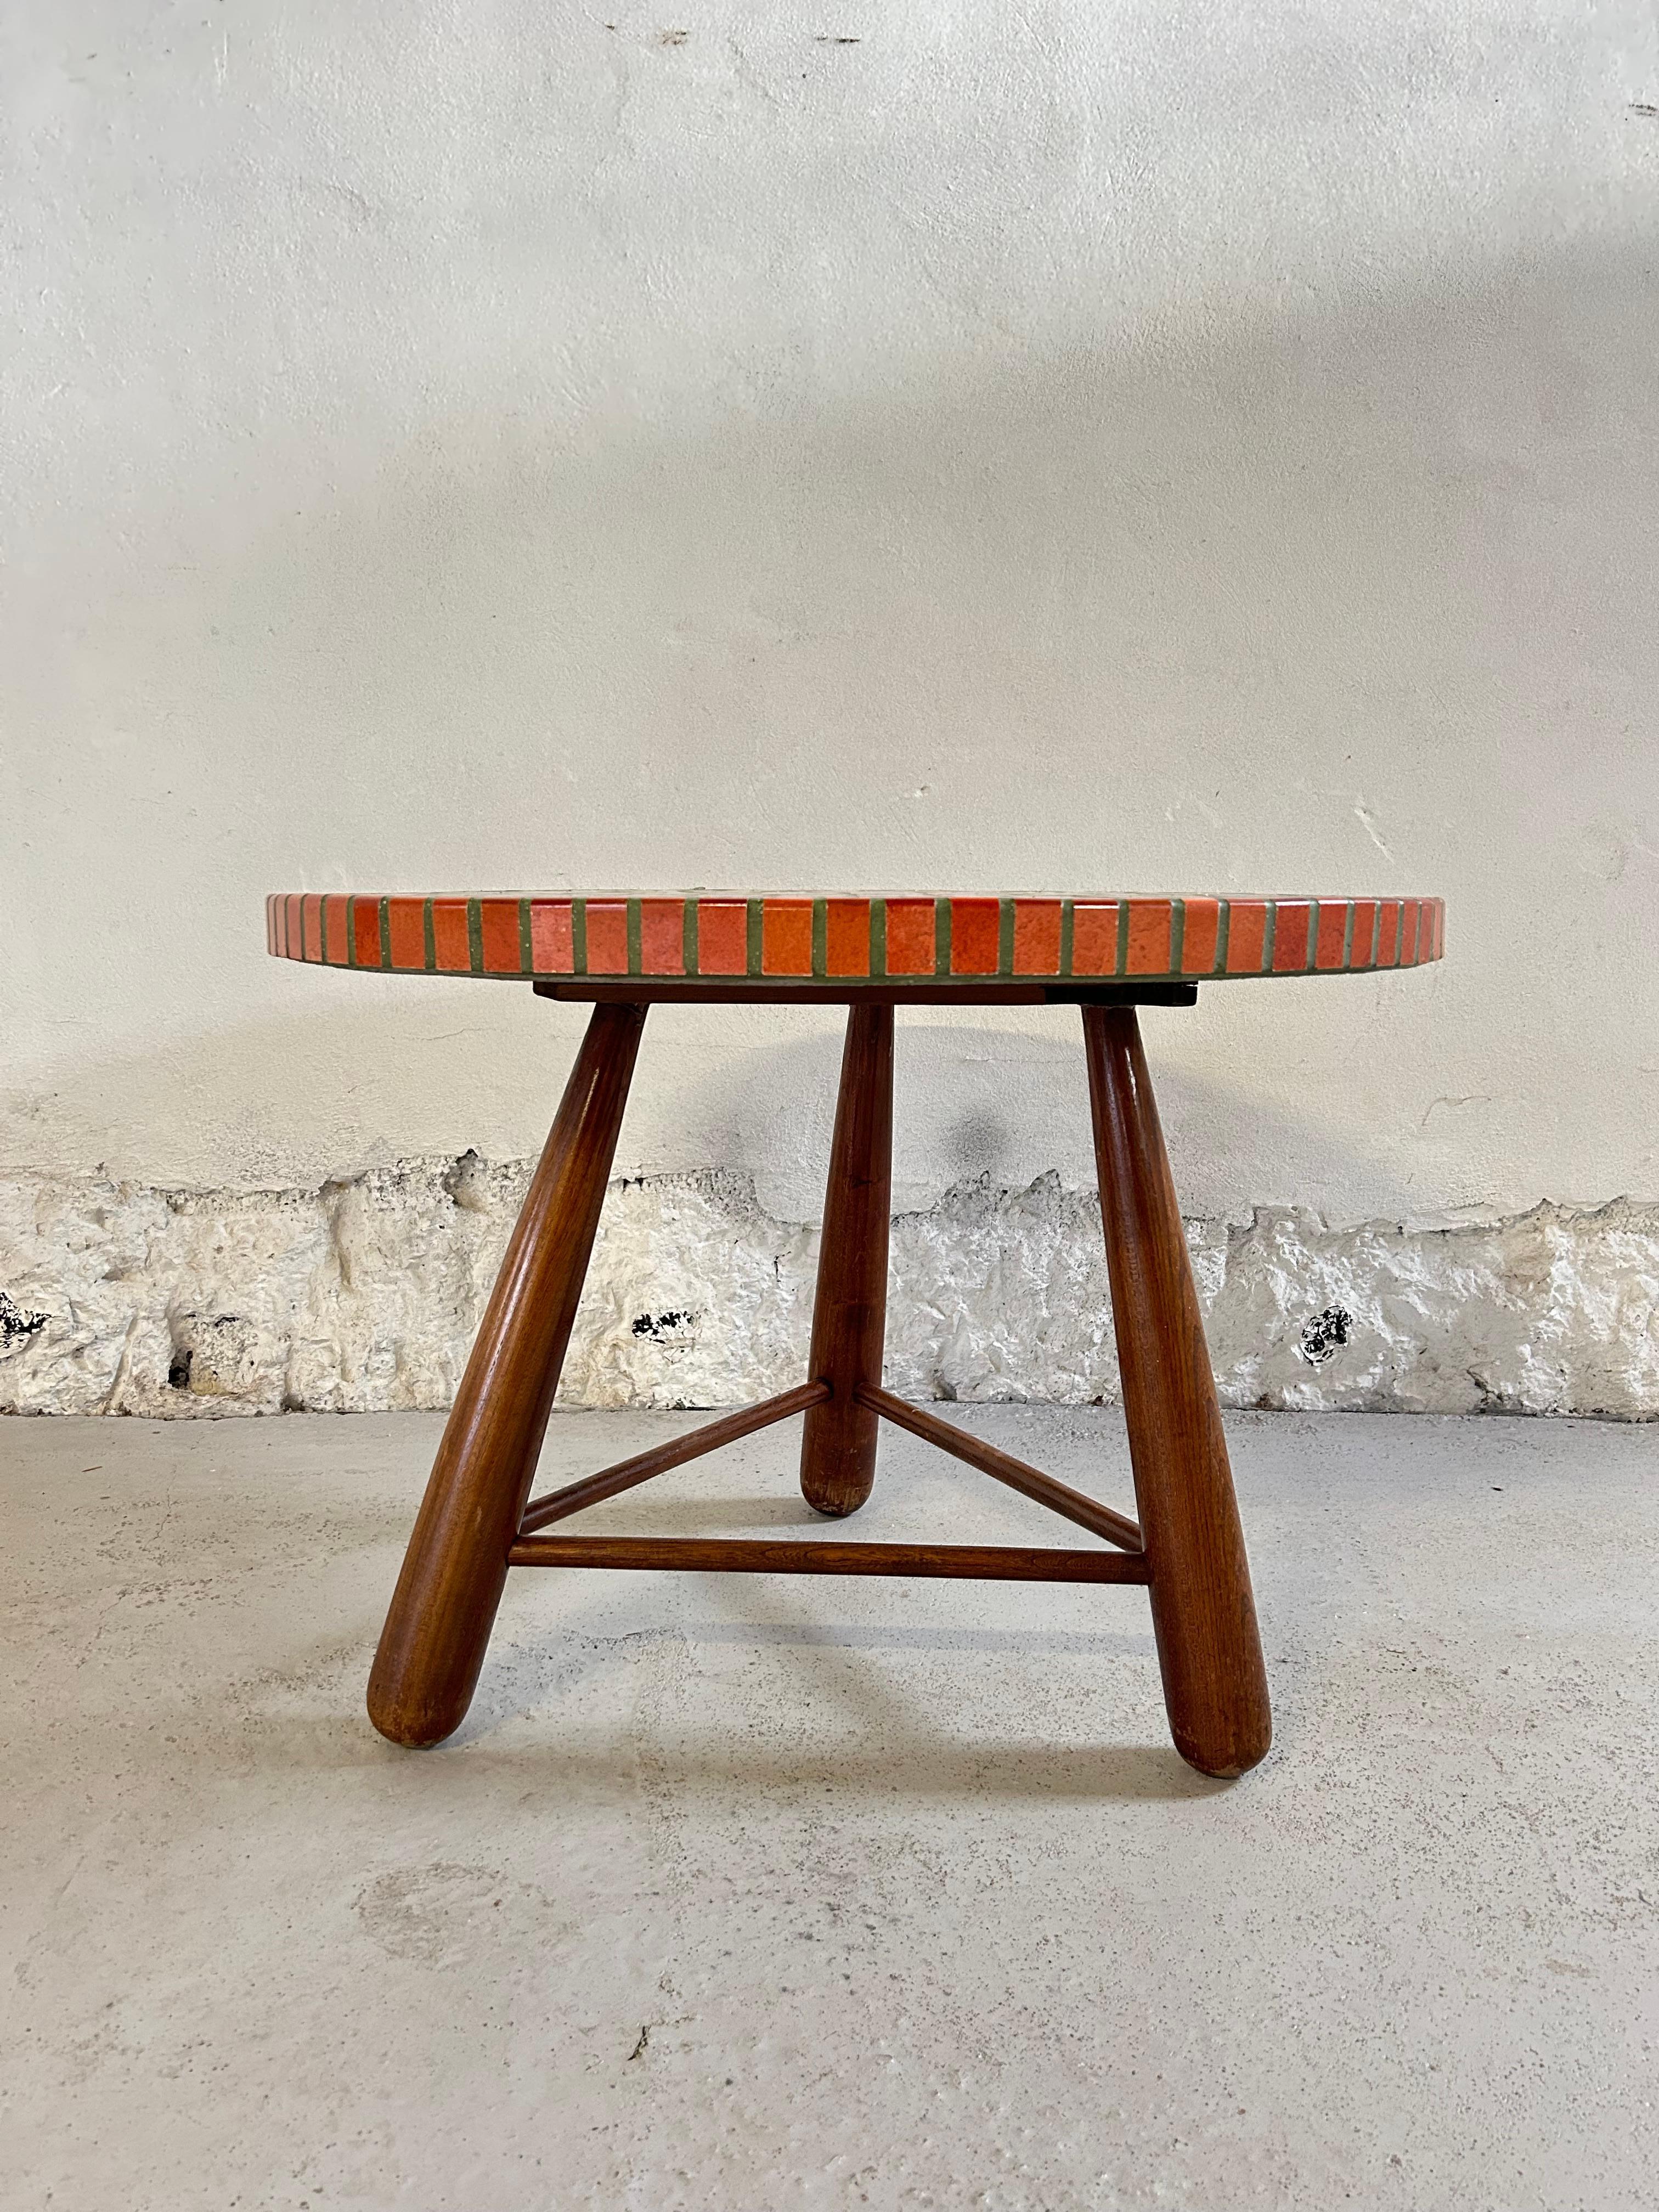 Art Deco Decorative Otto C Jensen Side Table with Mosaic and Stained Elm, Denmark 1940’s